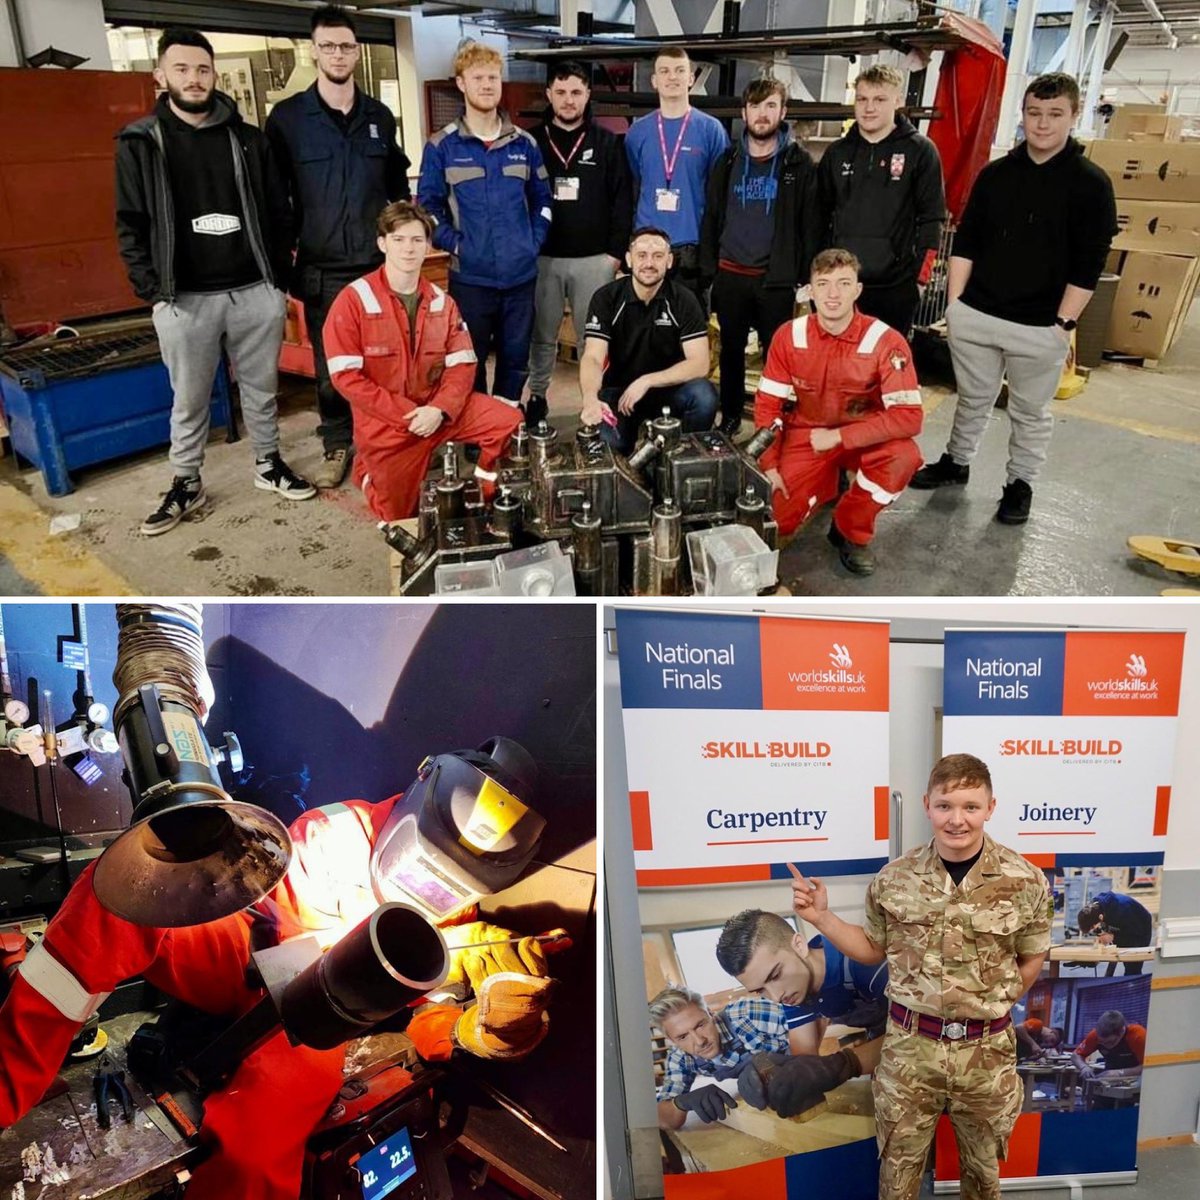 Today is @WorldSkills National Finals day. Four @Proud_Sappers finalists nail 2 x Gold (carpentry and welding) and 2 x Bronze (plumbing and wedding) medals. What an awesome @BritishArmy achievement. Well done Andrew, Tangier, Thomas and Jack. @hq_recruiting @armyjobs #STEM.